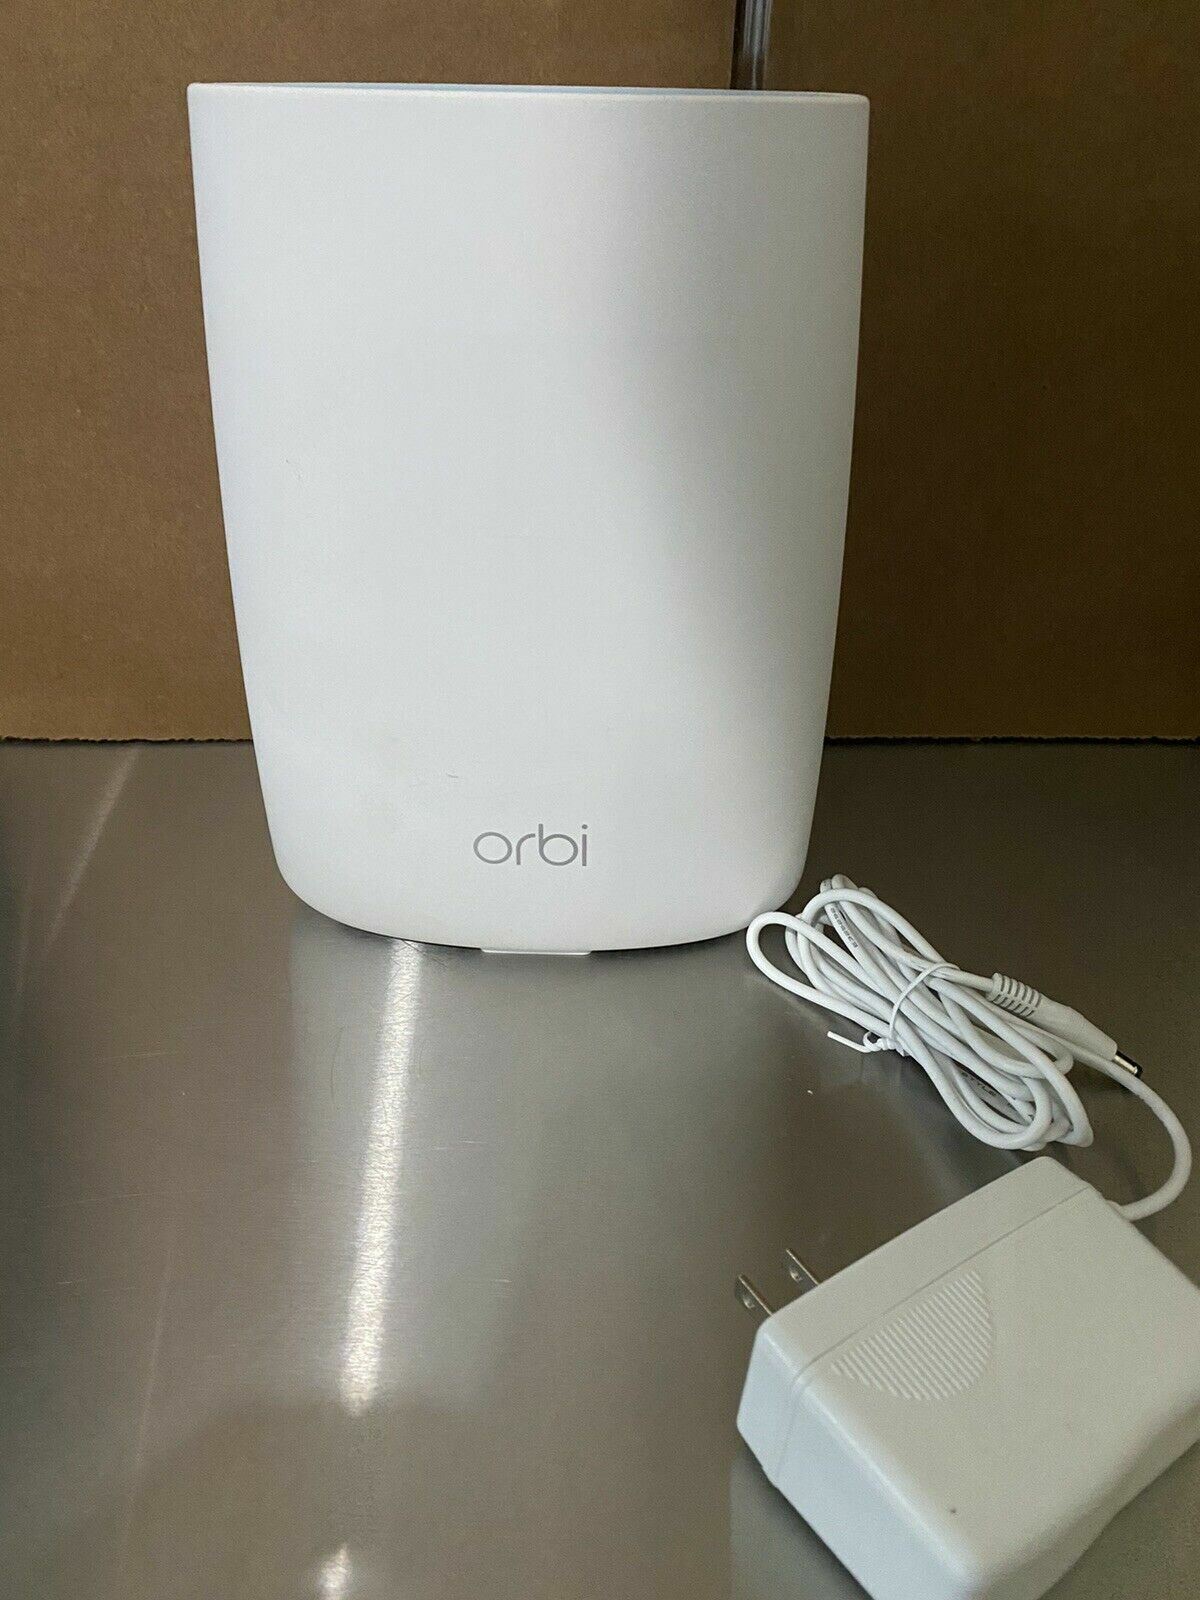 How Can I Safely Log Into My Orbi Router?